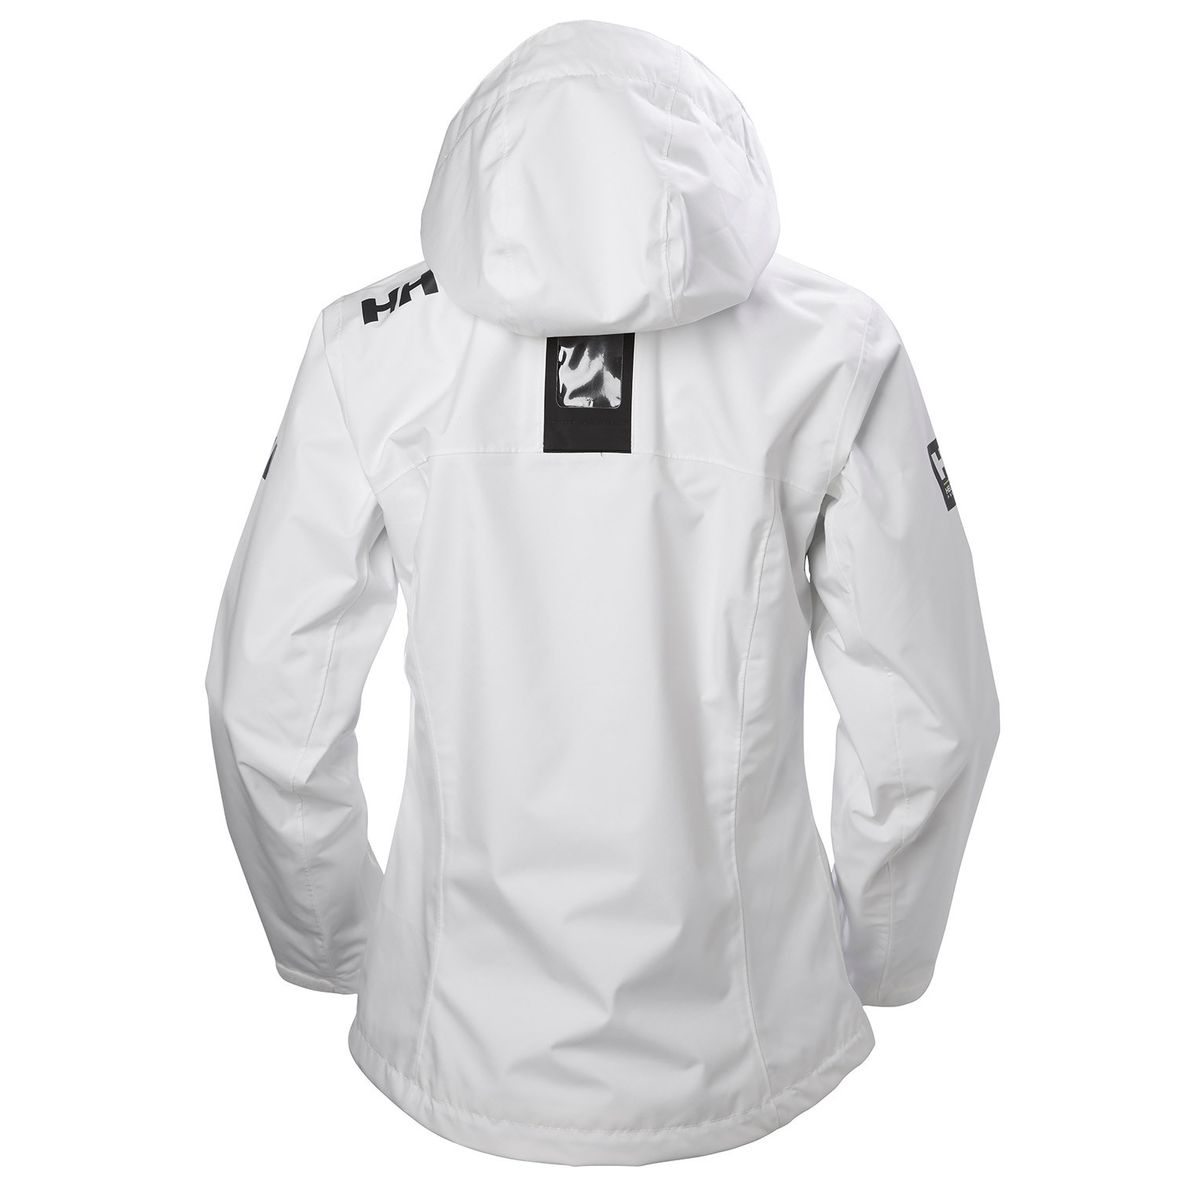 HELLY HANSEN - W CREW HOODED JACKET - Donna - Cappotti